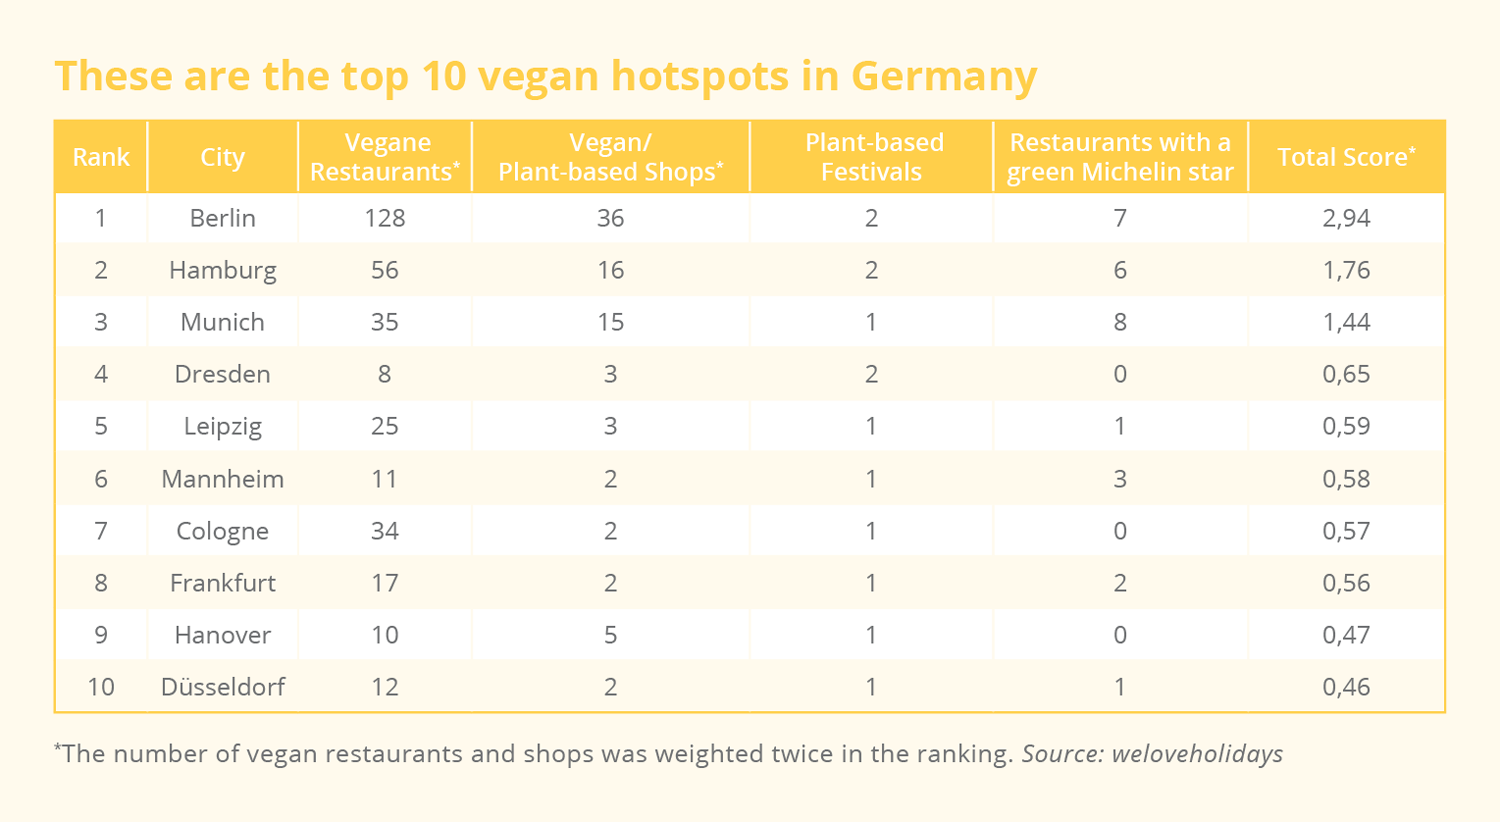 VERMISCHTES These are the top 10 vegan hotspots in Germany